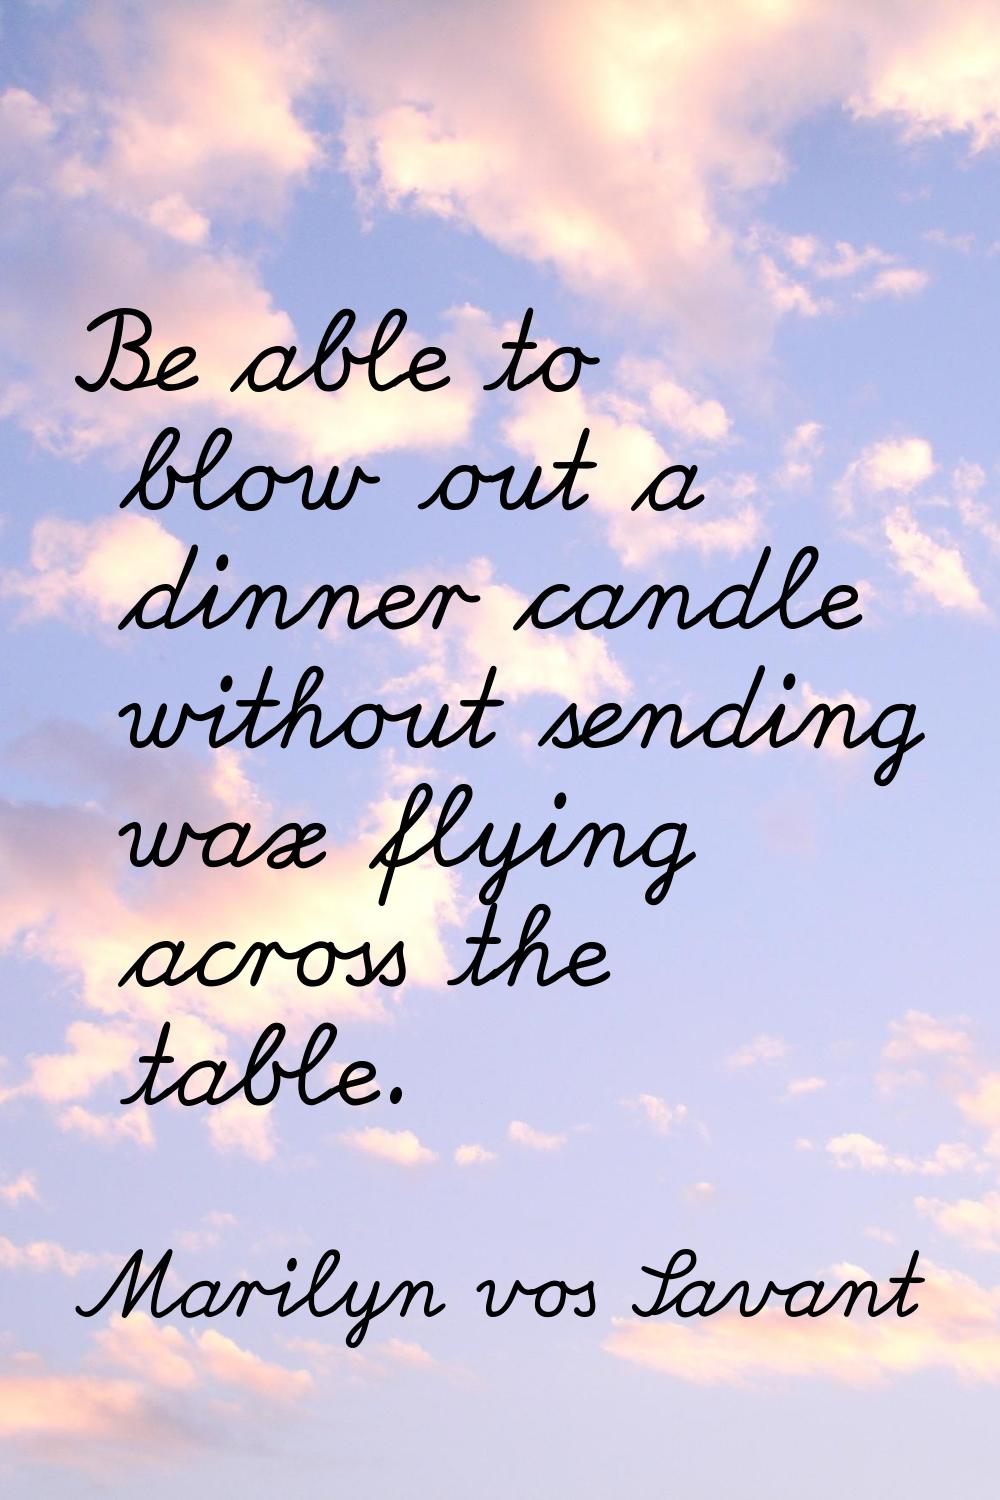 Be able to blow out a dinner candle without sending wax flying across the table.